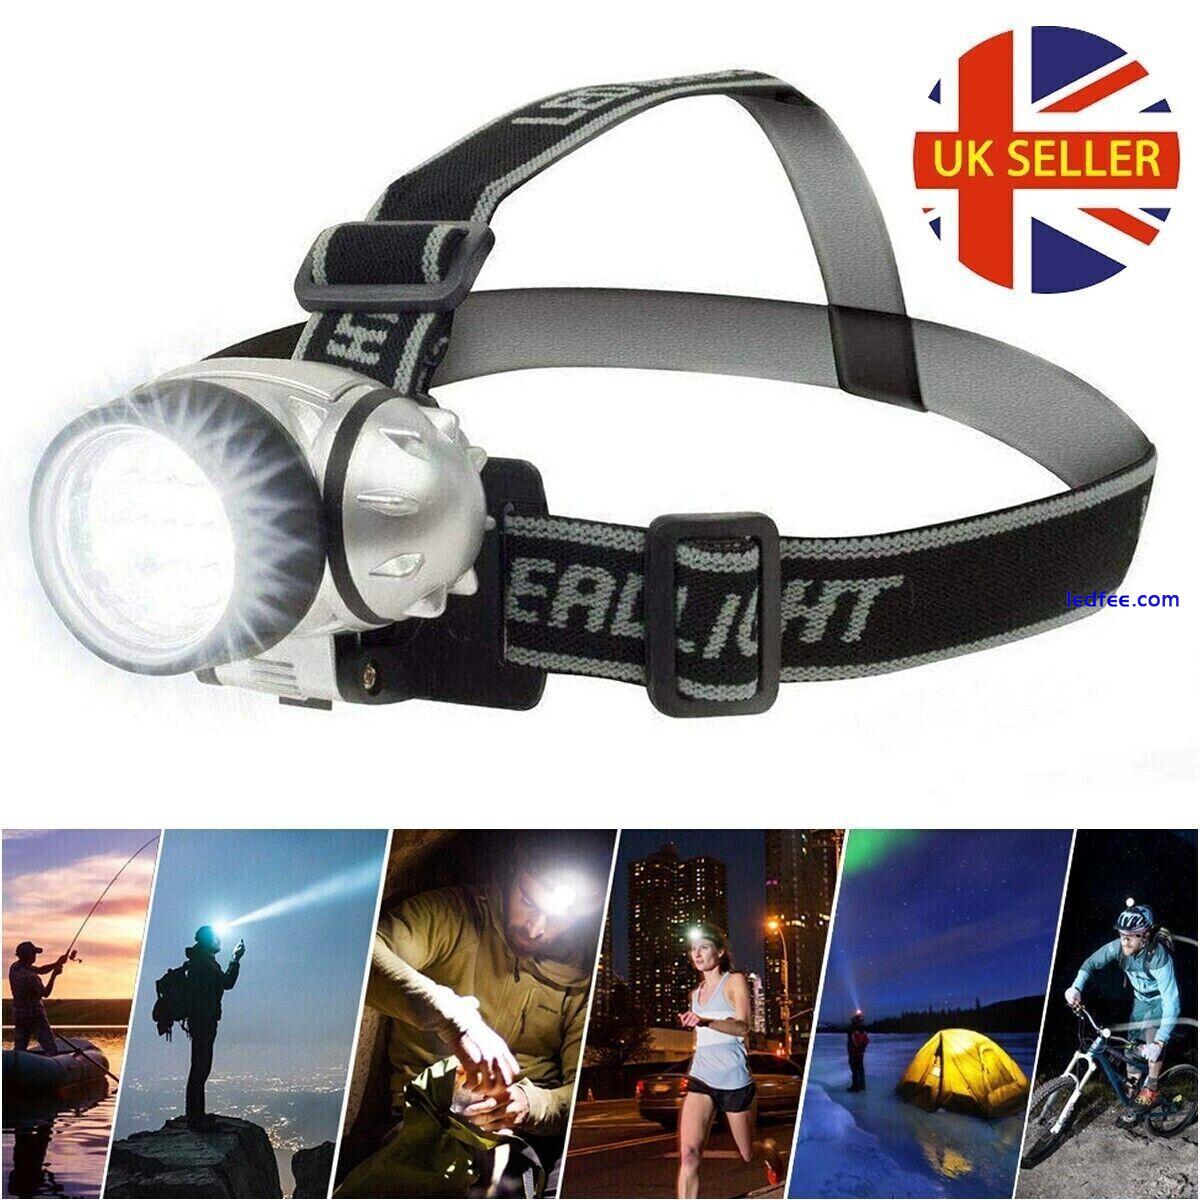 12 LED Head Torch Lamp Light Bright Outdoor Waterproof For Camping Fishing Work 0 